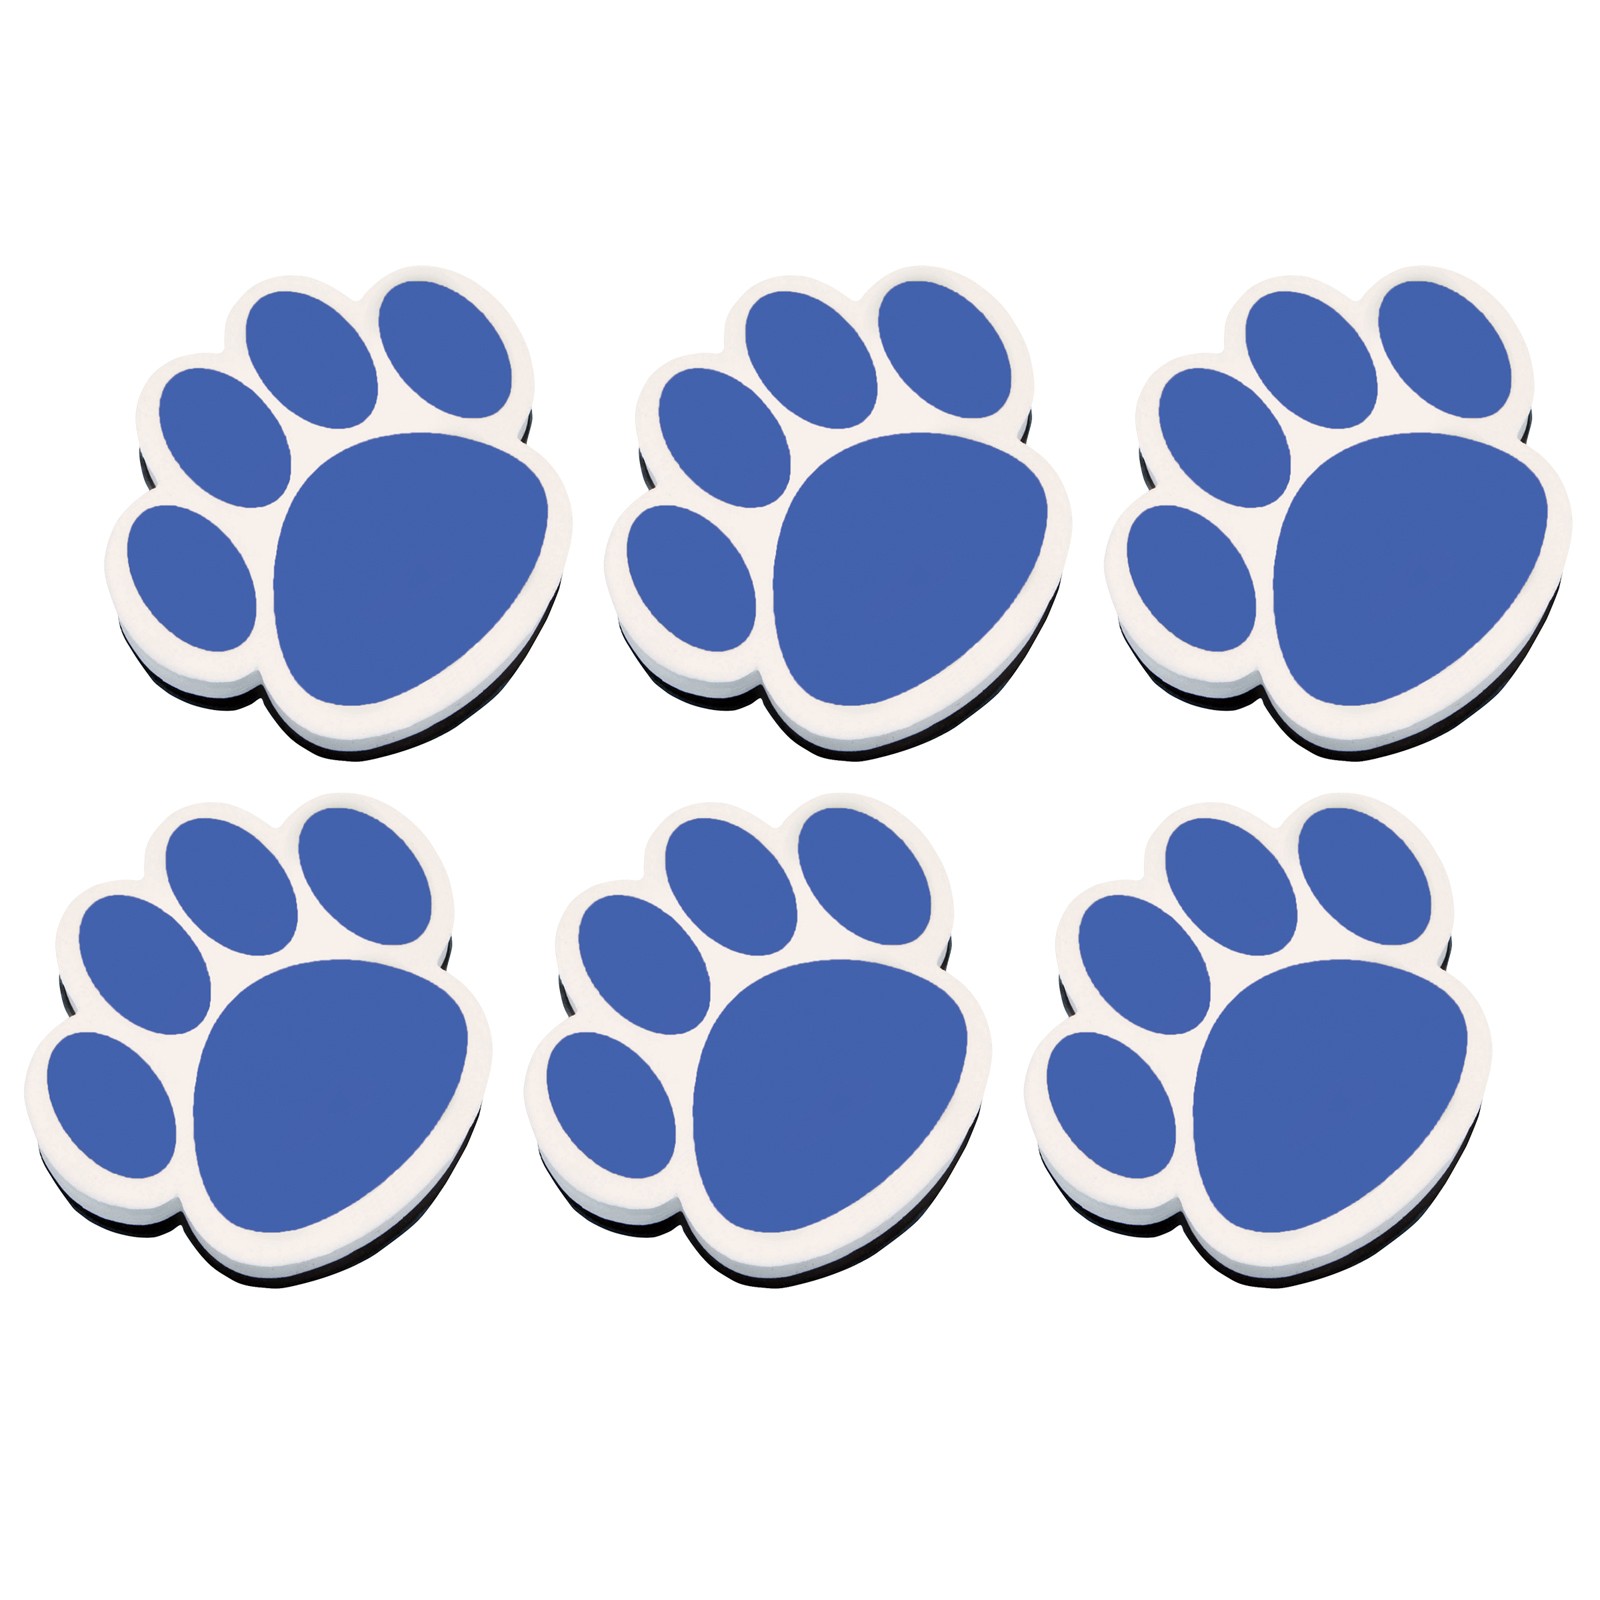 Magnetic Whiteboard Eraser, Blue Paw, Pack of 6